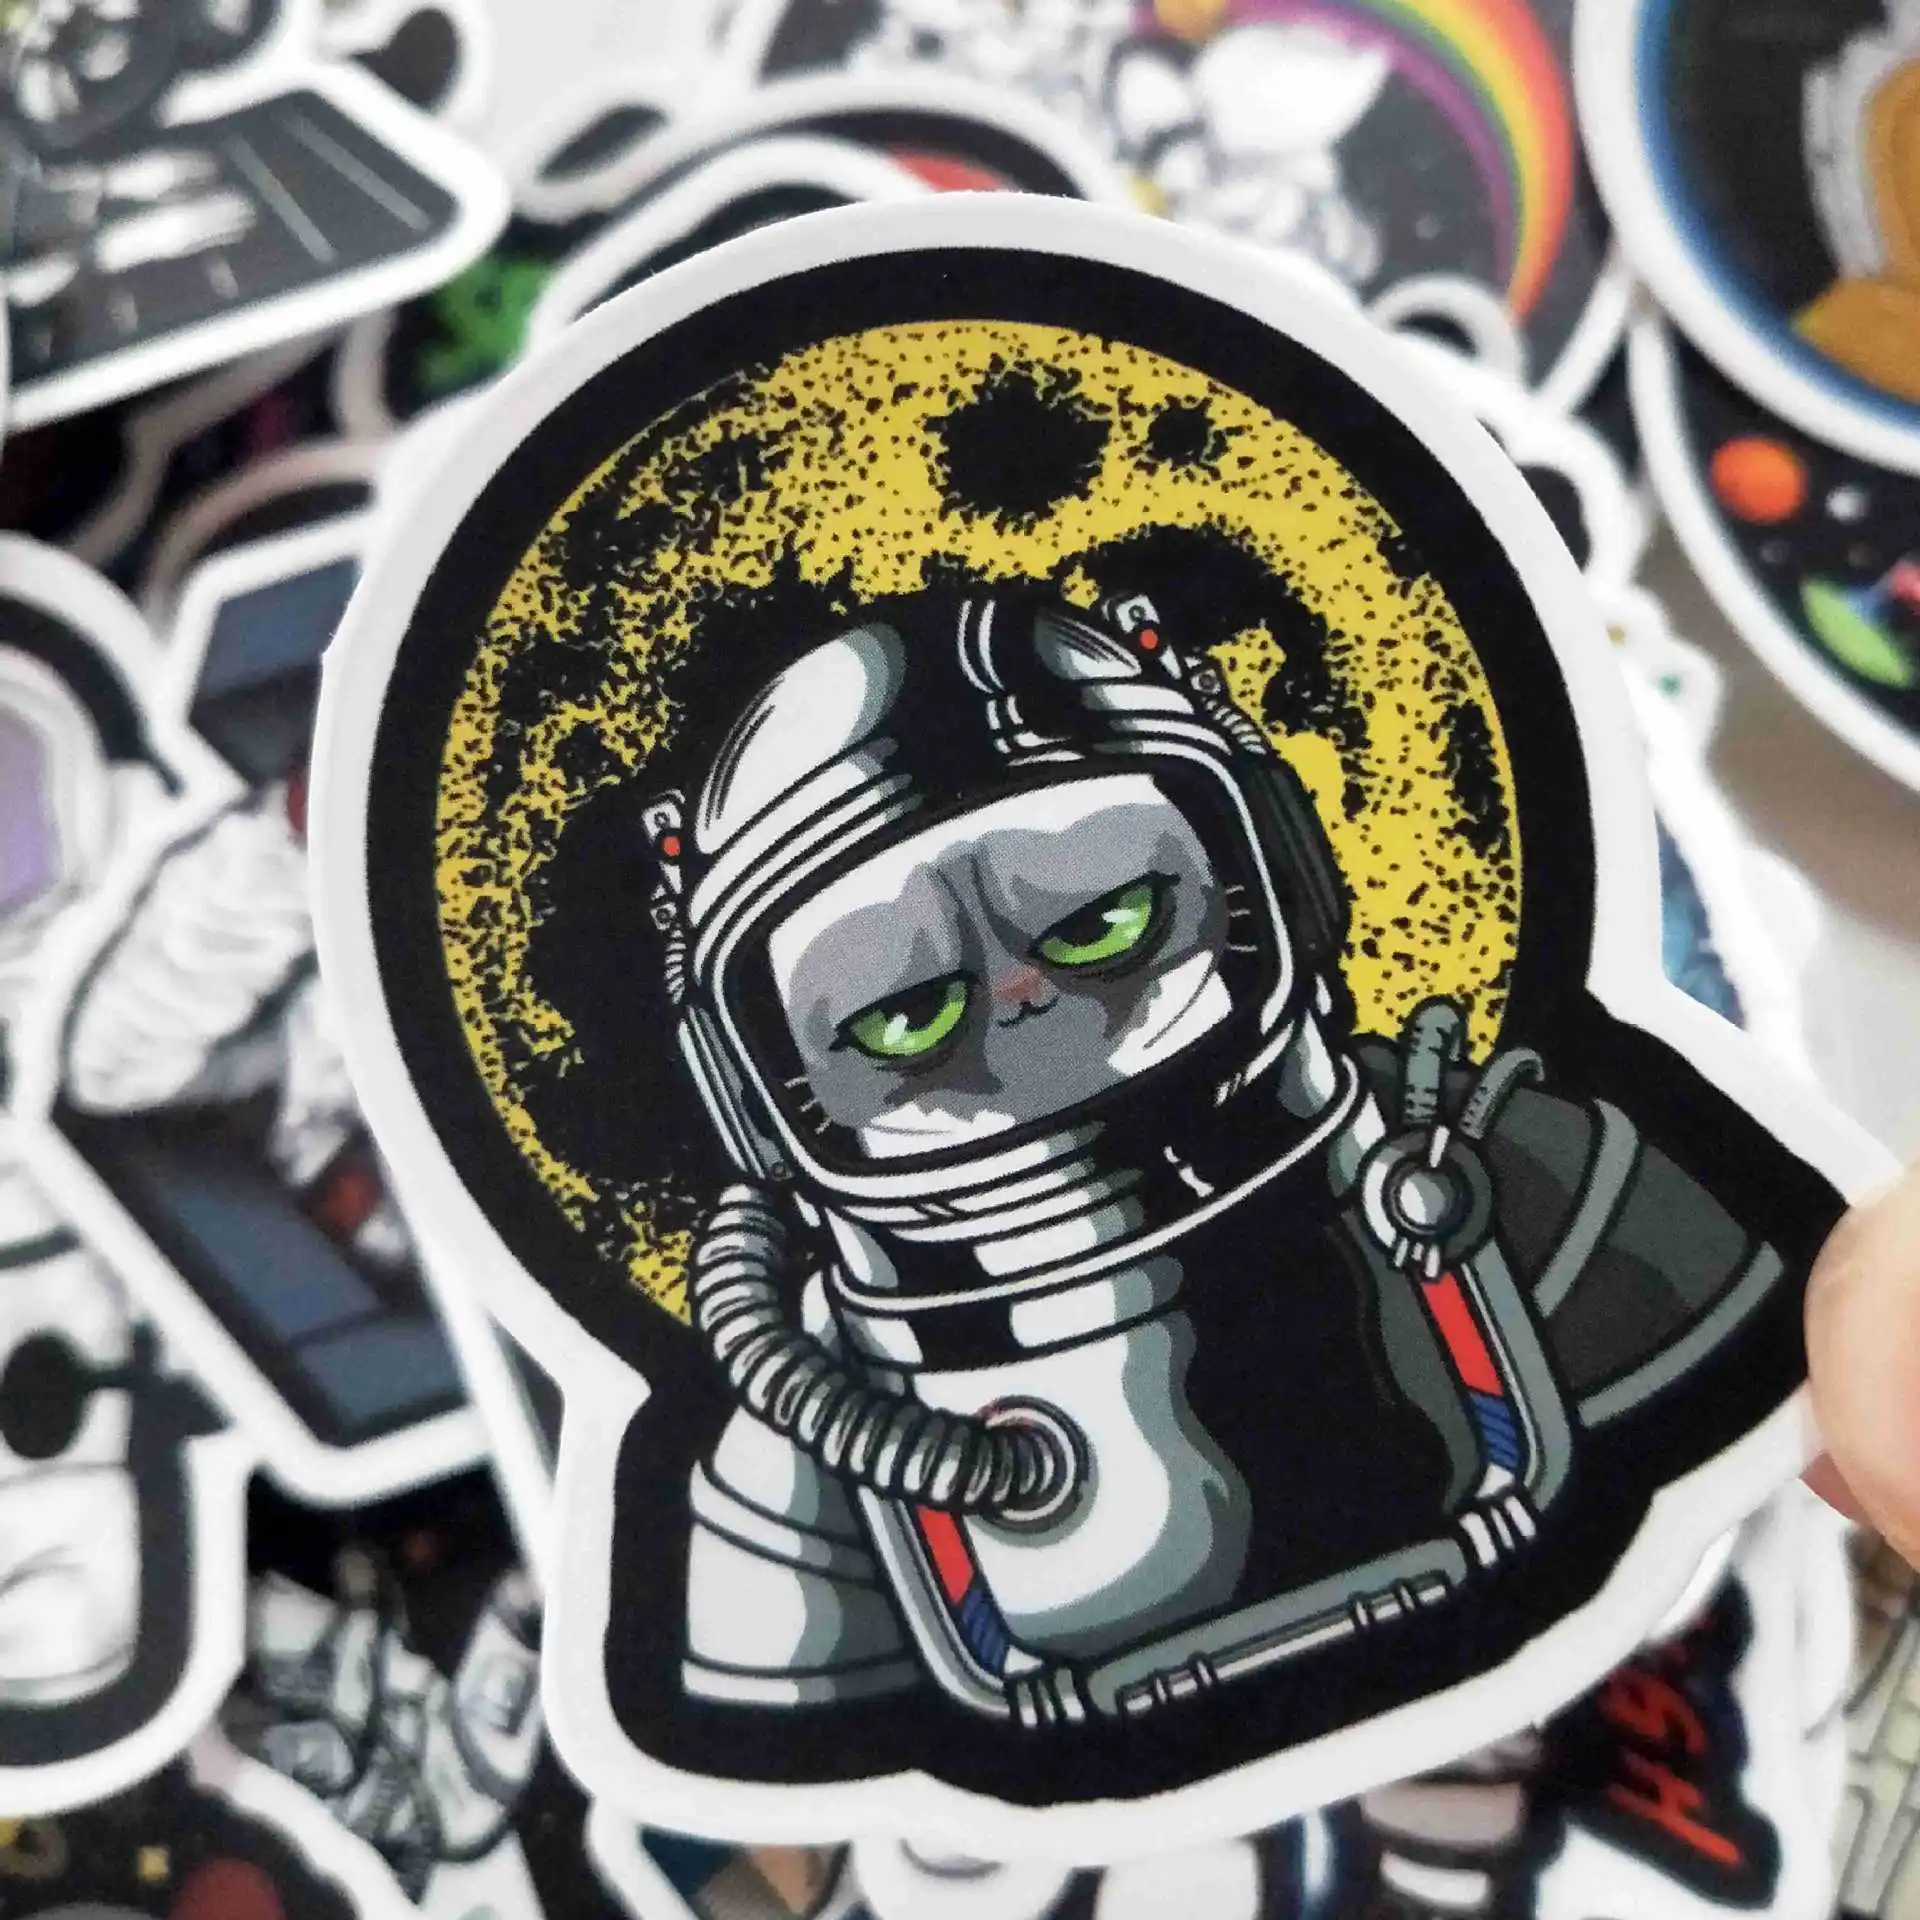 

10/30/50Pcs Outer Space Astronaut Stickers For Travel Suitcase Skateboard Scrapbook Bullet Journal Graffiti Sticker Kids DIY Toy